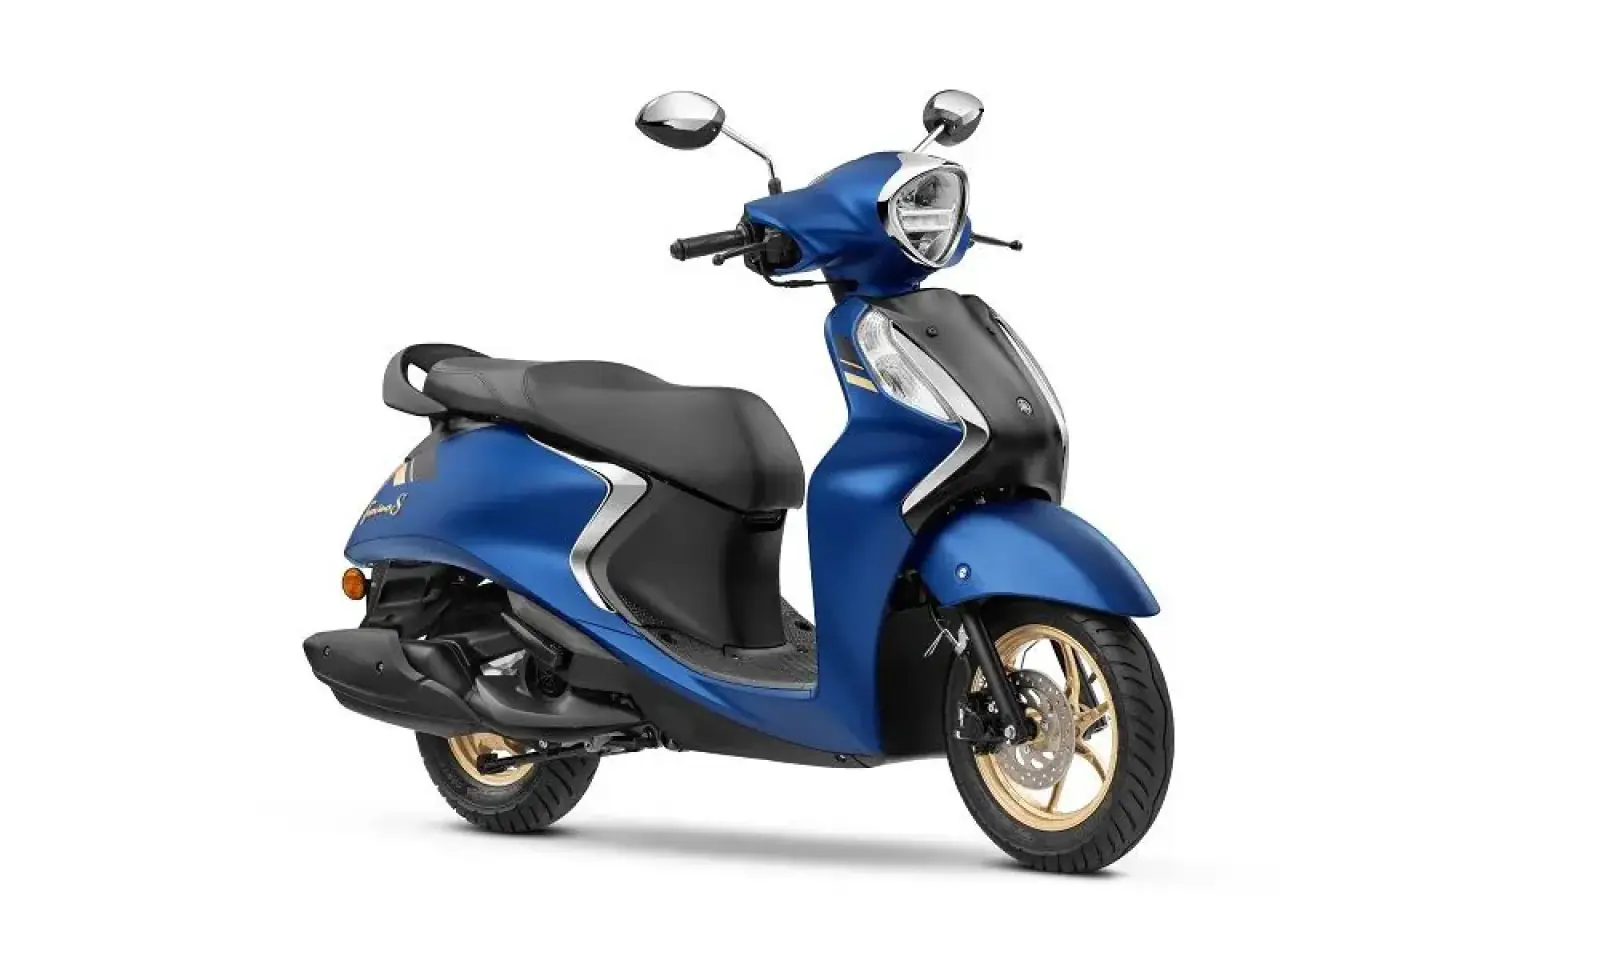 Yamaha's Fascino S Scooter launched with special features, know its price